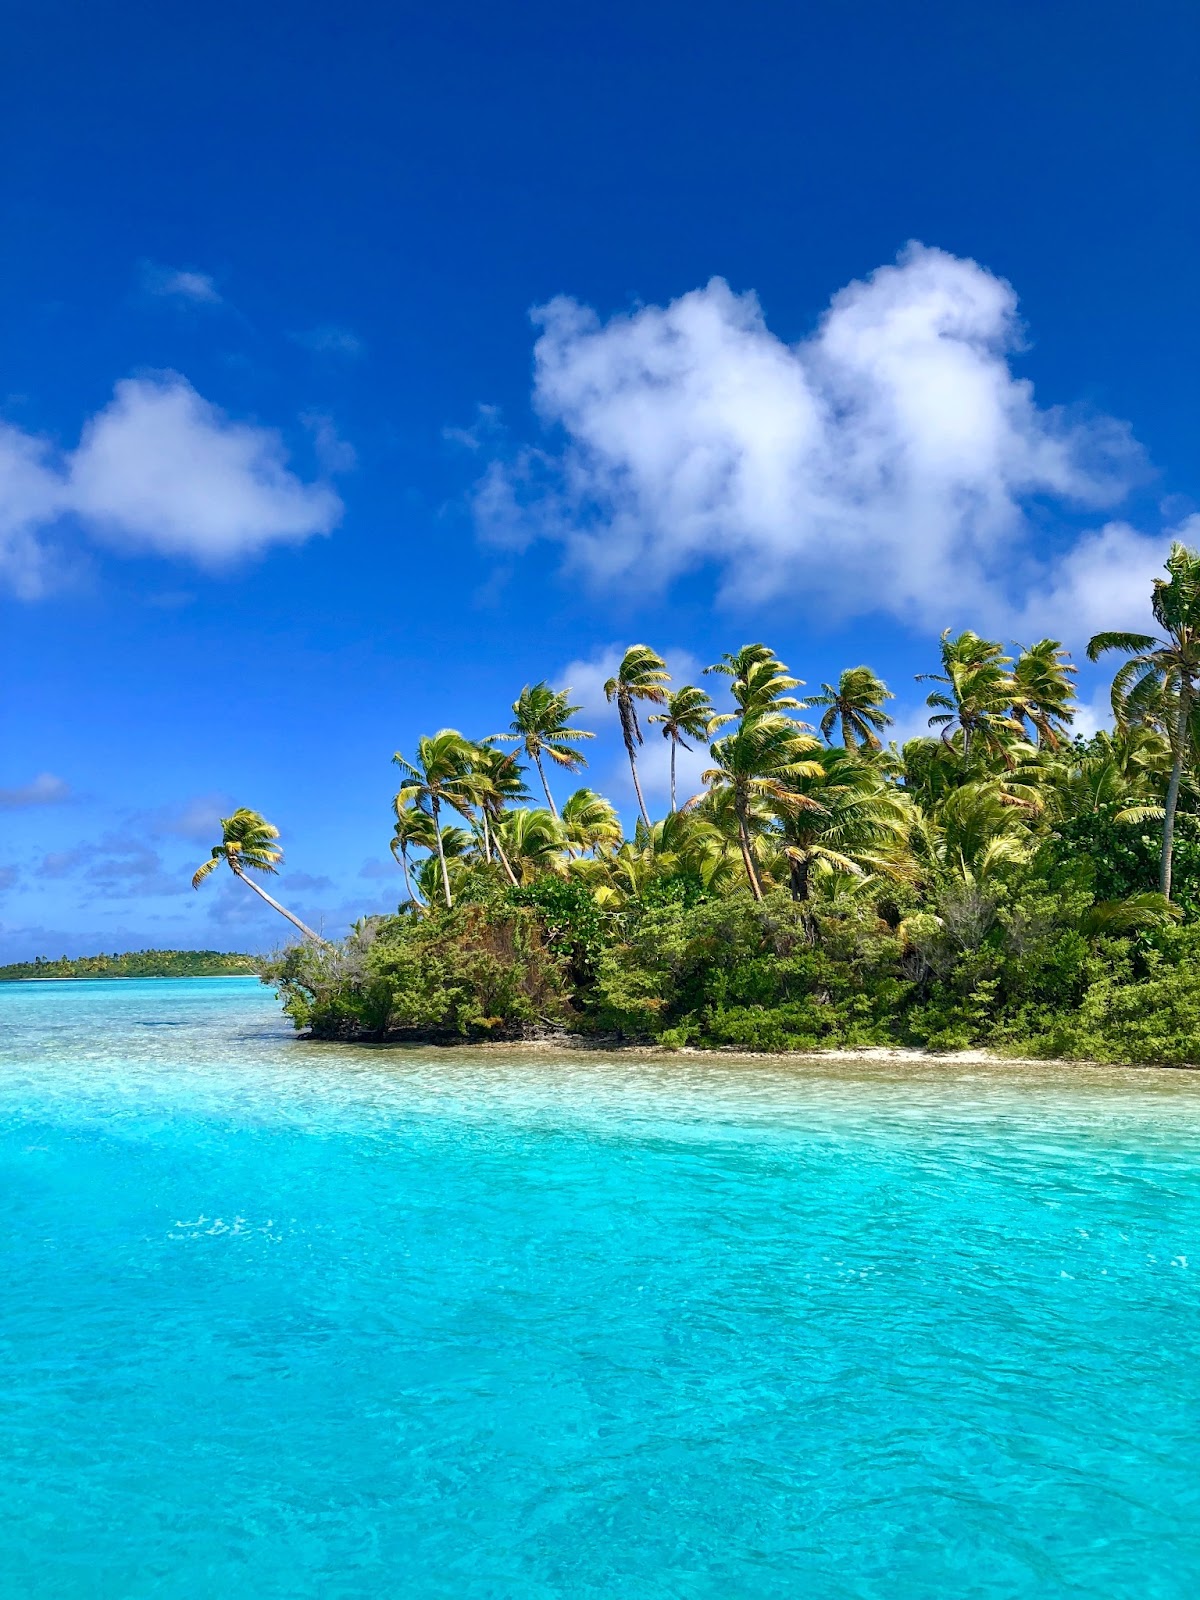 Image of a pristine beach with turquoise waters in Cook Islands.